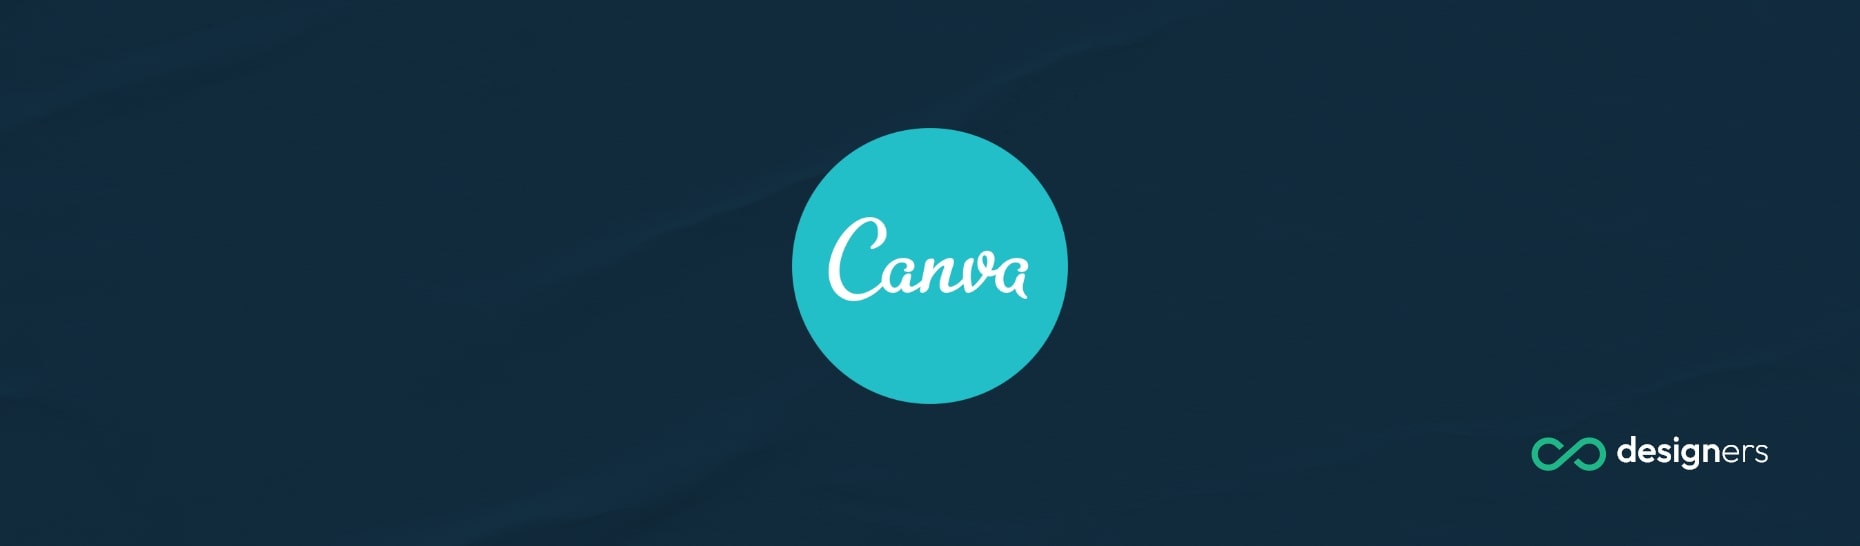 Who Is Canva Target Market?